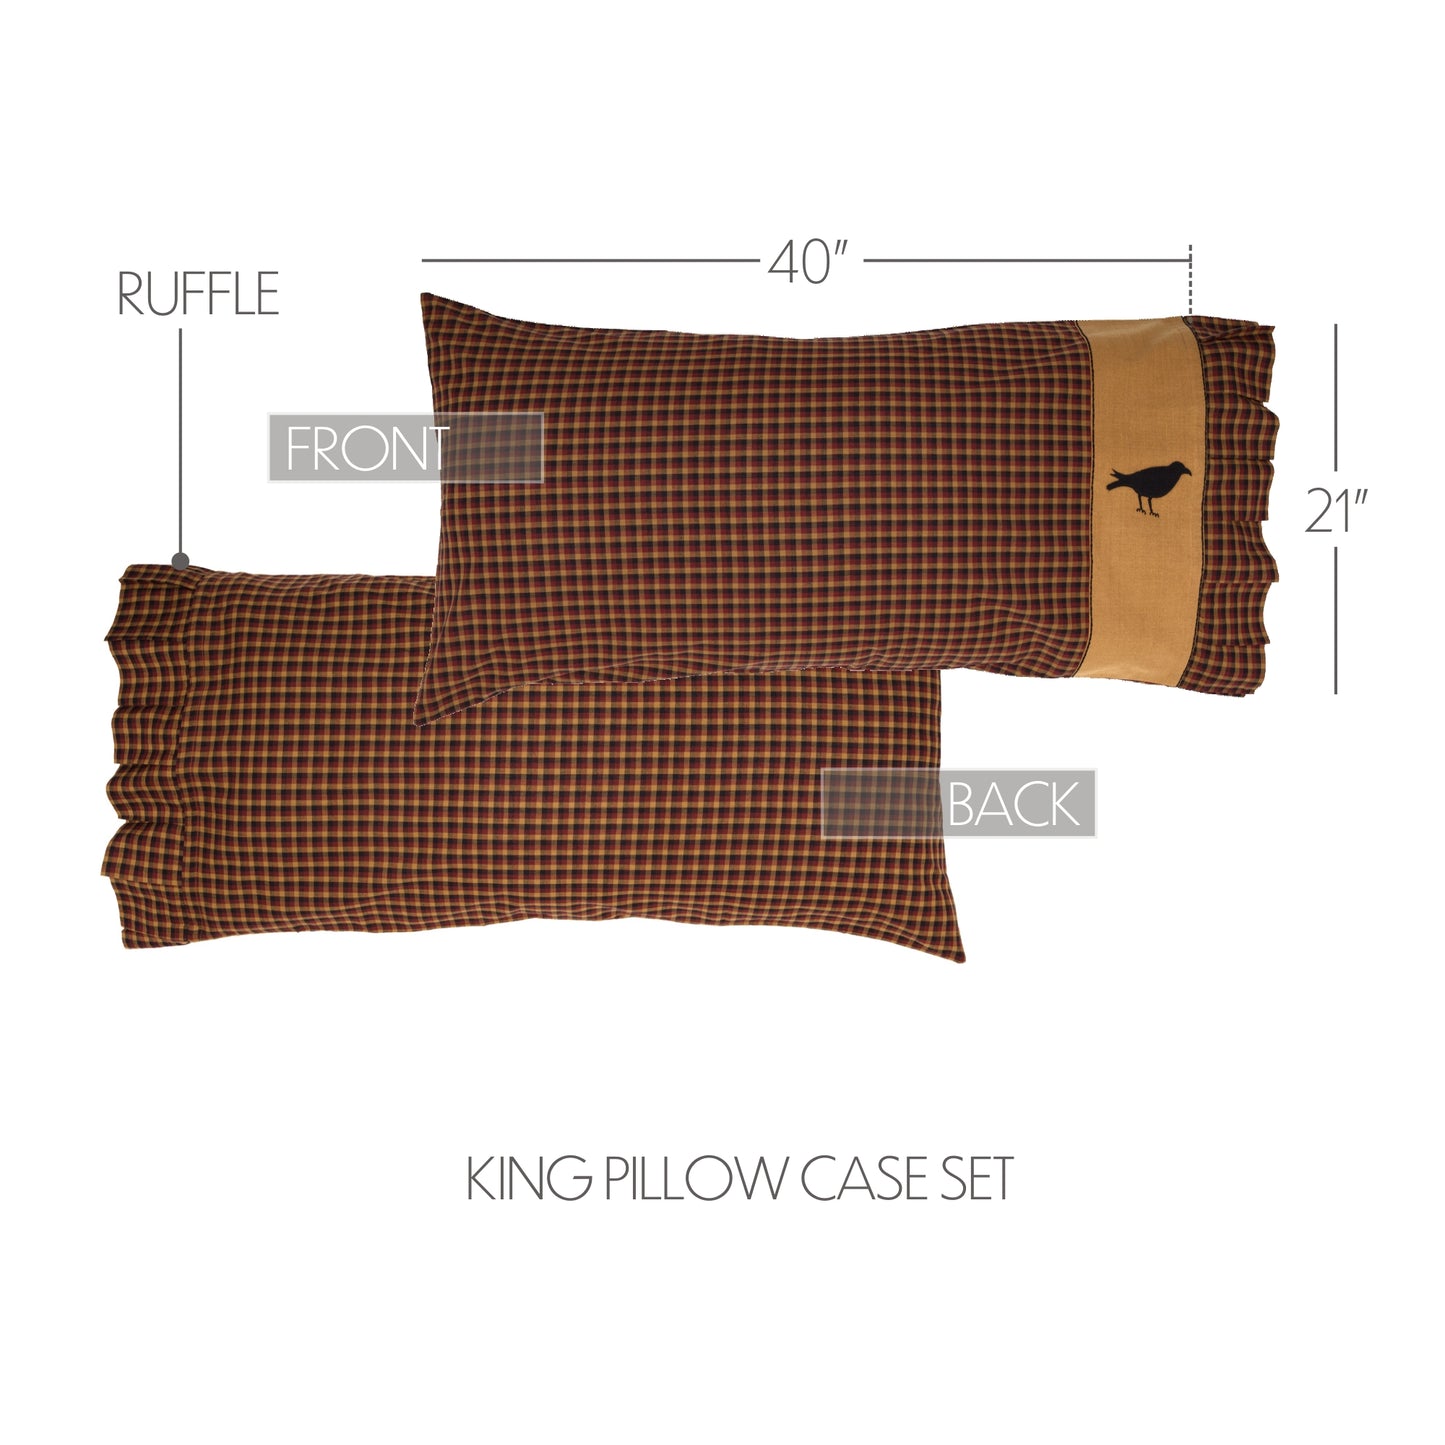 45604-Heritage-Farms-Crow-King-Pillow-Case-Set-of-2-21x40-image-1